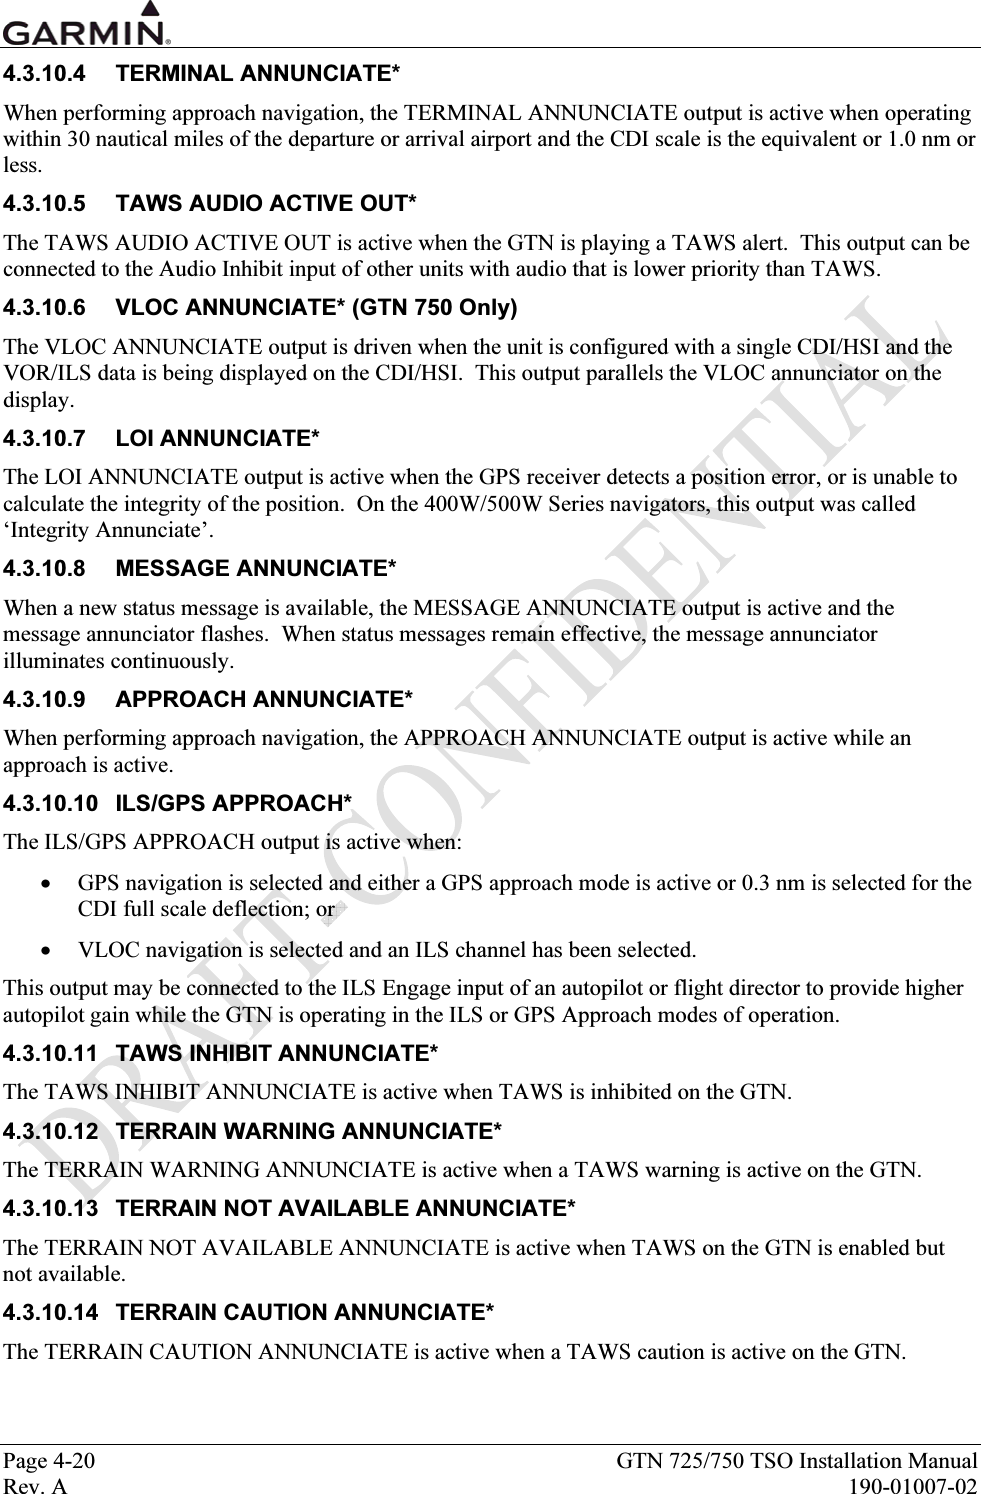  Page 4-20  GTN 725/750 TSO Installation Manual Rev. A  190-01007-02 4.3.10.4 TERMINAL ANNUNCIATE* When performing approach navigation, the TERMINAL ANNUNCIATE output is active when operating within 30 nautical miles of the departure or arrival airport and the CDI scale is the equivalent or 1.0 nm or less. 4.3.10.5  TAWS AUDIO ACTIVE OUT* The TAWS AUDIO ACTIVE OUT is active when the GTN is playing a TAWS alert.  This output can be connected to the Audio Inhibit input of other units with audio that is lower priority than TAWS. 4.3.10.6  VLOC ANNUNCIATE* (GTN 750 Only) The VLOC ANNUNCIATE output is driven when the unit is configured with a single CDI/HSI and the VOR/ILS data is being displayed on the CDI/HSI.  This output parallels the VLOC annunciator on the display. 4.3.10.7 LOI ANNUNCIATE* The LOI ANNUNCIATE output is active when the GPS receiver detects a position error, or is unable to calculate the integrity of the position.  On the 400W/500W Series navigators, this output was called ‘Integrity Annunciate’. 4.3.10.8 MESSAGE ANNUNCIATE* When a new status message is available, the MESSAGE ANNUNCIATE output is active and the message annunciator flashes.  When status messages remain effective, the message annunciator illuminates continuously. 4.3.10.9 APPROACH ANNUNCIATE* When performing approach navigation, the APPROACH ANNUNCIATE output is active while an approach is active. 4.3.10.10 ILS/GPS APPROACH* The ILS/GPS APPROACH output is active when: • GPS navigation is selected and either a GPS approach mode is active or 0.3 nm is selected for the CDI full scale deflection; or  • VLOC navigation is selected and an ILS channel has been selected.   This output may be connected to the ILS Engage input of an autopilot or flight director to provide higher autopilot gain while the GTN is operating in the ILS or GPS Approach modes of operation. 4.3.10.11  TAWS INHIBIT ANNUNCIATE* The TAWS INHIBIT ANNUNCIATE is active when TAWS is inhibited on the GTN. 4.3.10.12  TERRAIN WARNING ANNUNCIATE* The TERRAIN WARNING ANNUNCIATE is active when a TAWS warning is active on the GTN. 4.3.10.13  TERRAIN NOT AVAILABLE ANNUNCIATE* The TERRAIN NOT AVAILABLE ANNUNCIATE is active when TAWS on the GTN is enabled but not available. 4.3.10.14  TERRAIN CAUTION ANNUNCIATE* The TERRAIN CAUTION ANNUNCIATE is active when a TAWS caution is active on the GTN. 